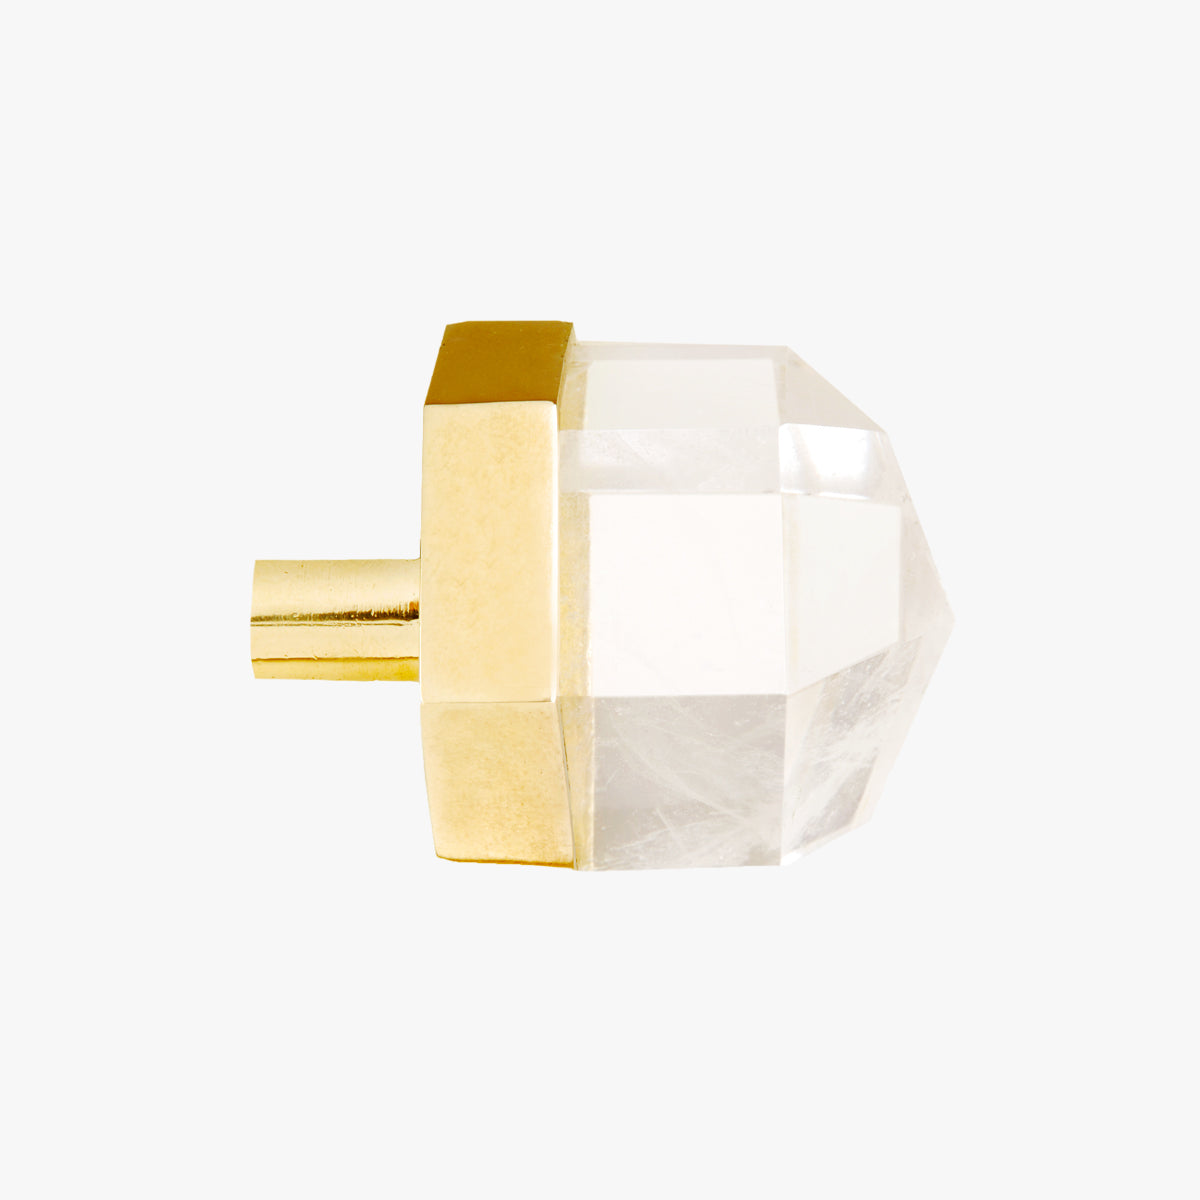 Thea knob handmade in clear quartz crystal and polished brass by Matthew Studios